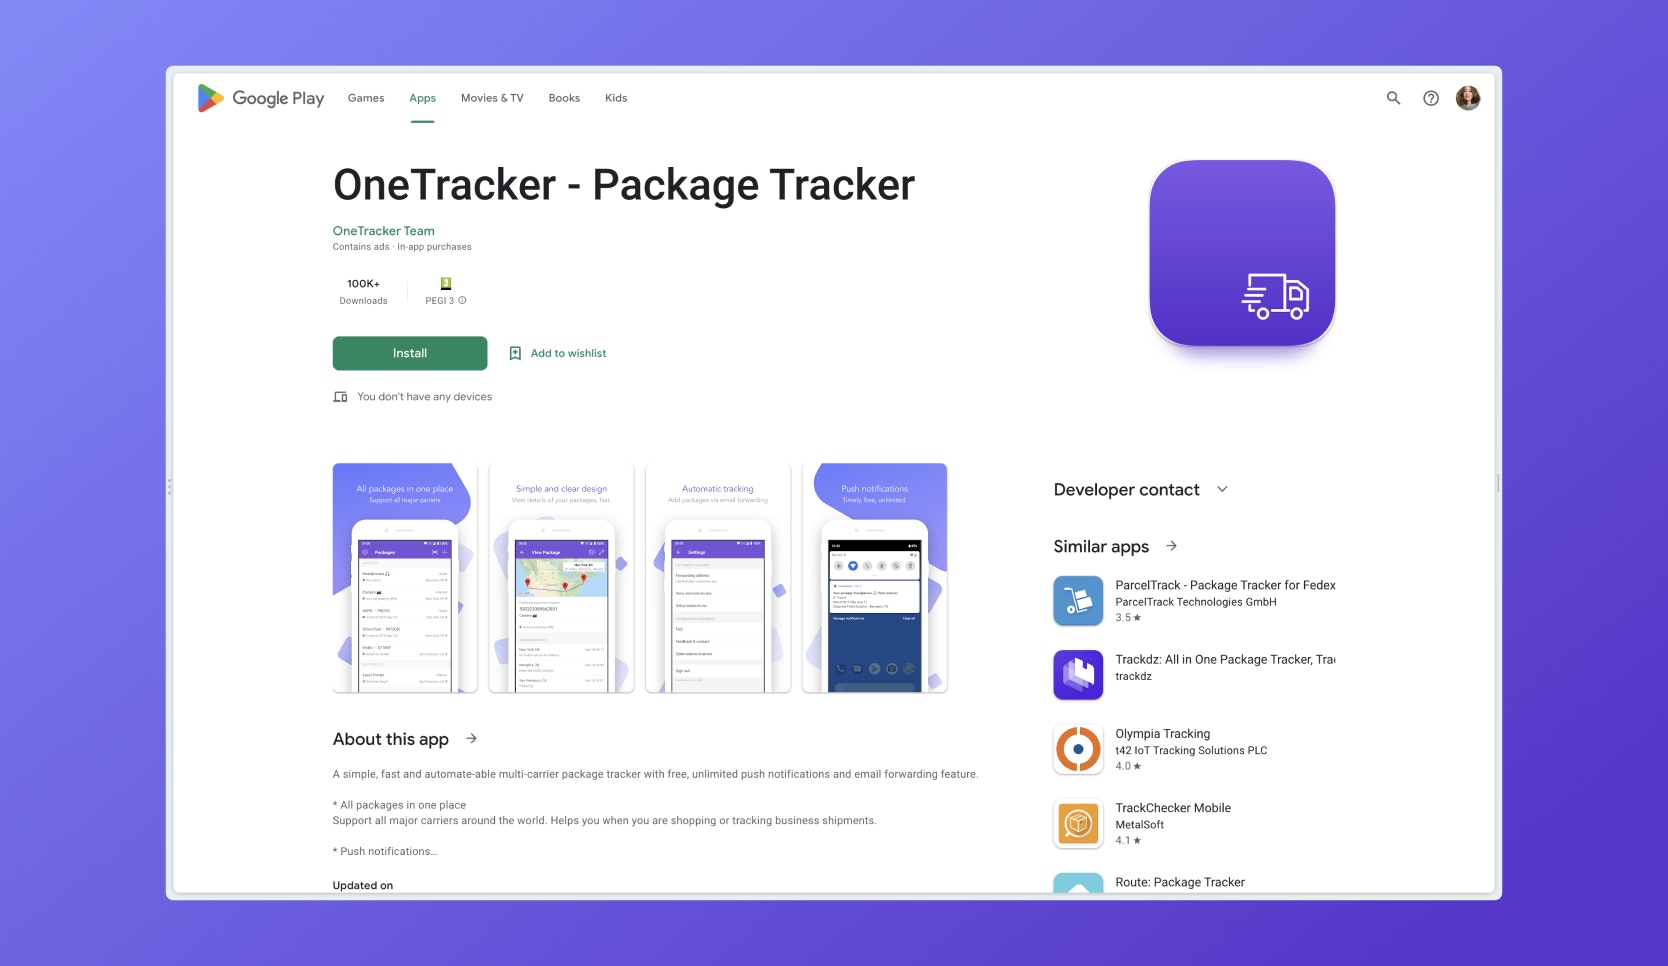 Google Playstore page for OneTracker – Package Tracker